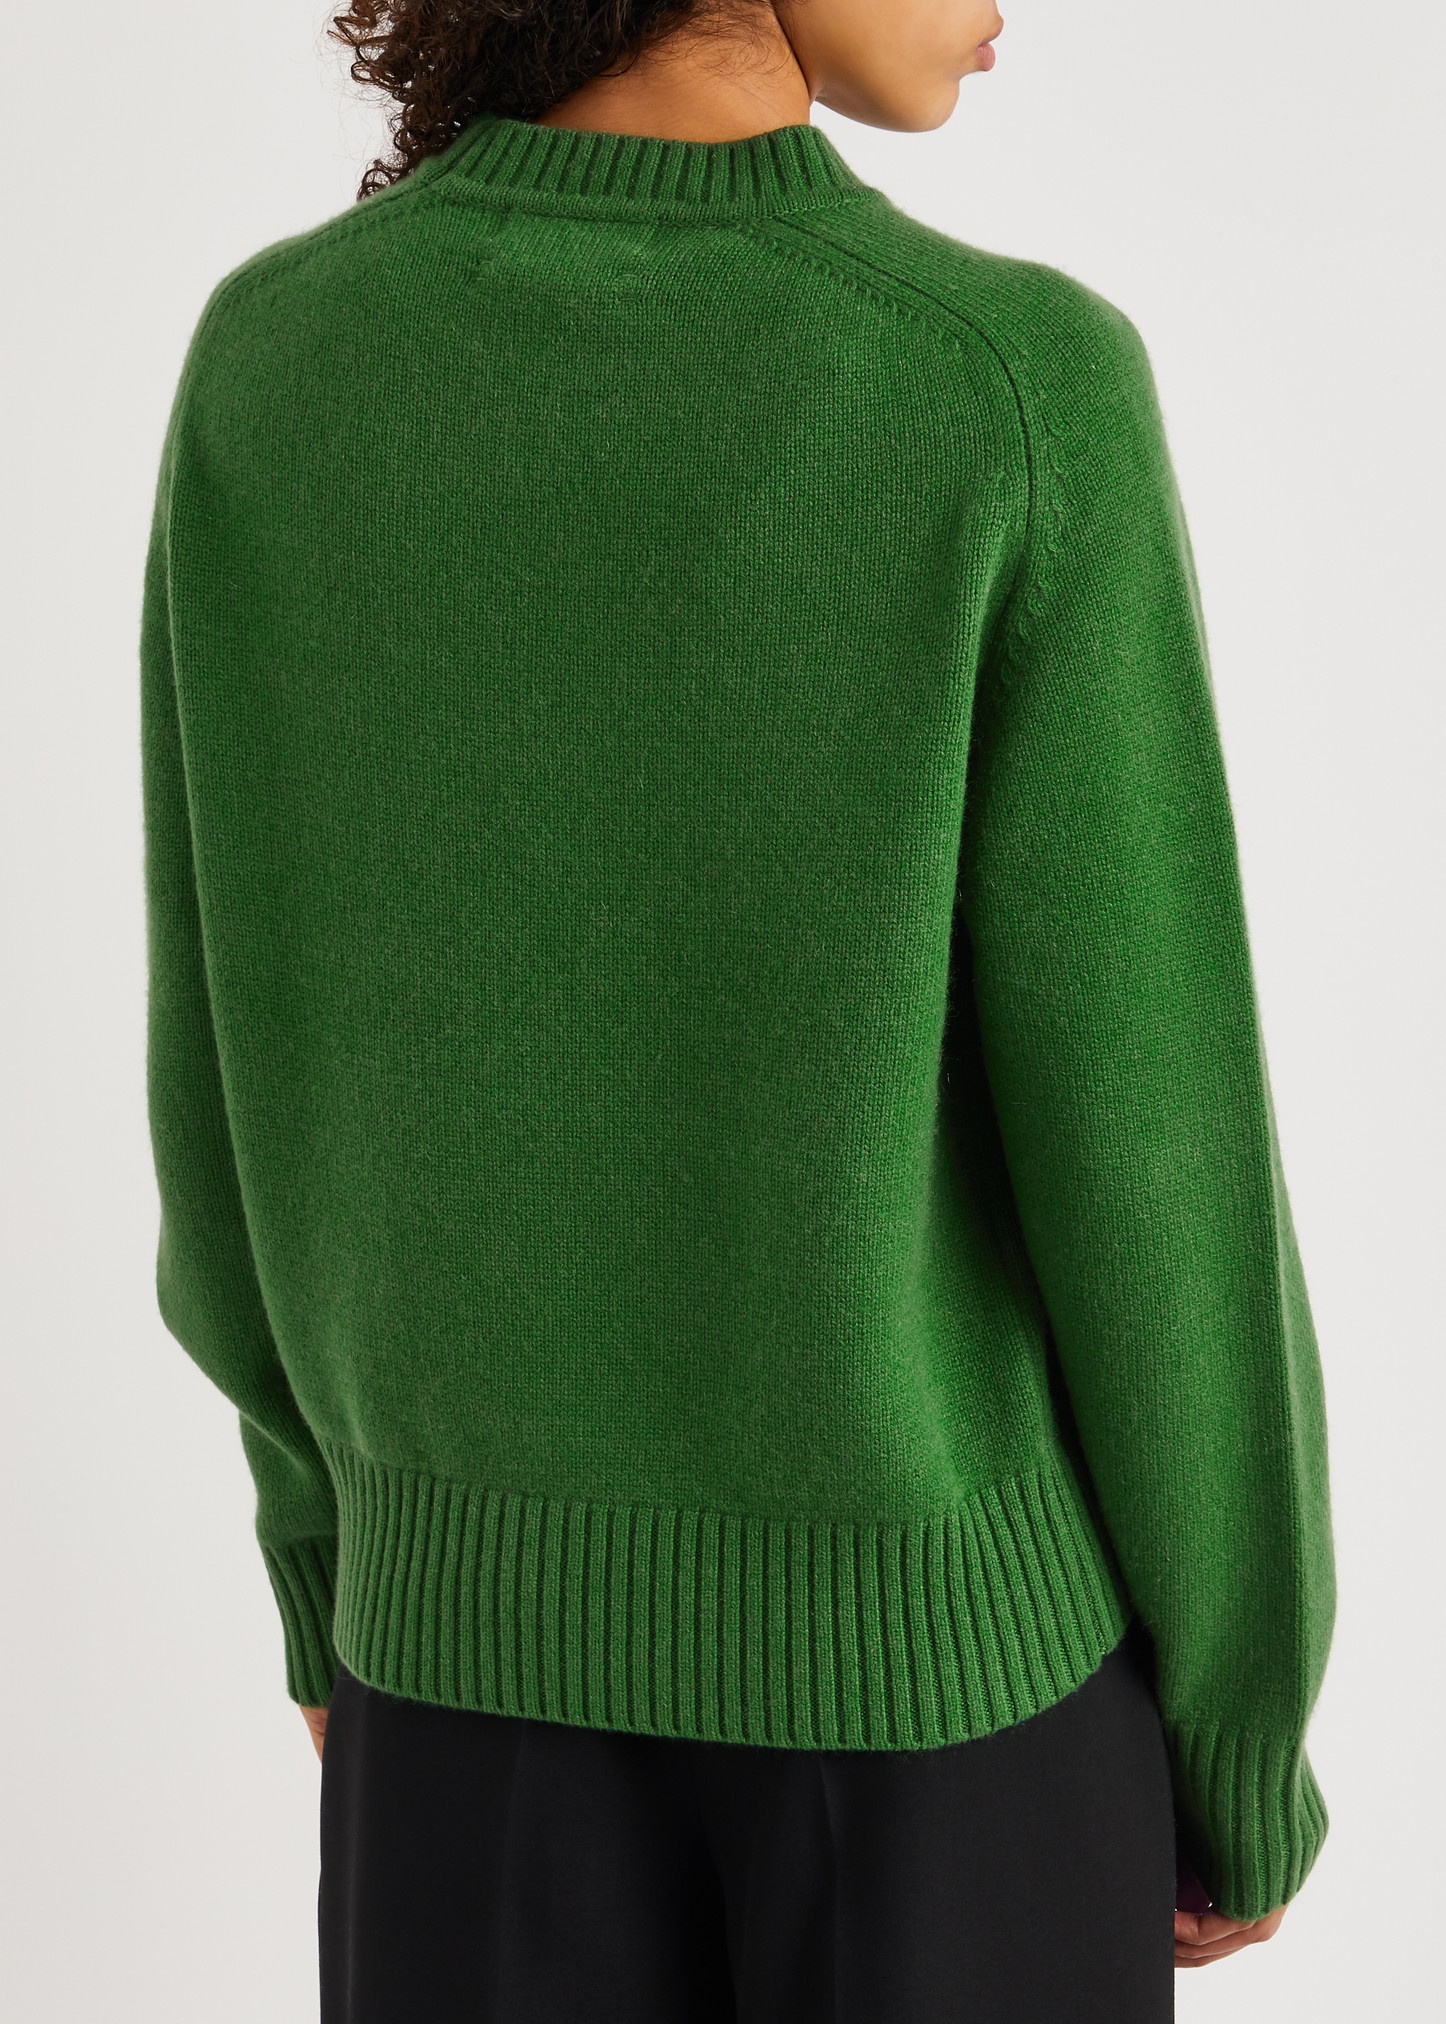 N°123 Bourgeois cashmere jumper - 3